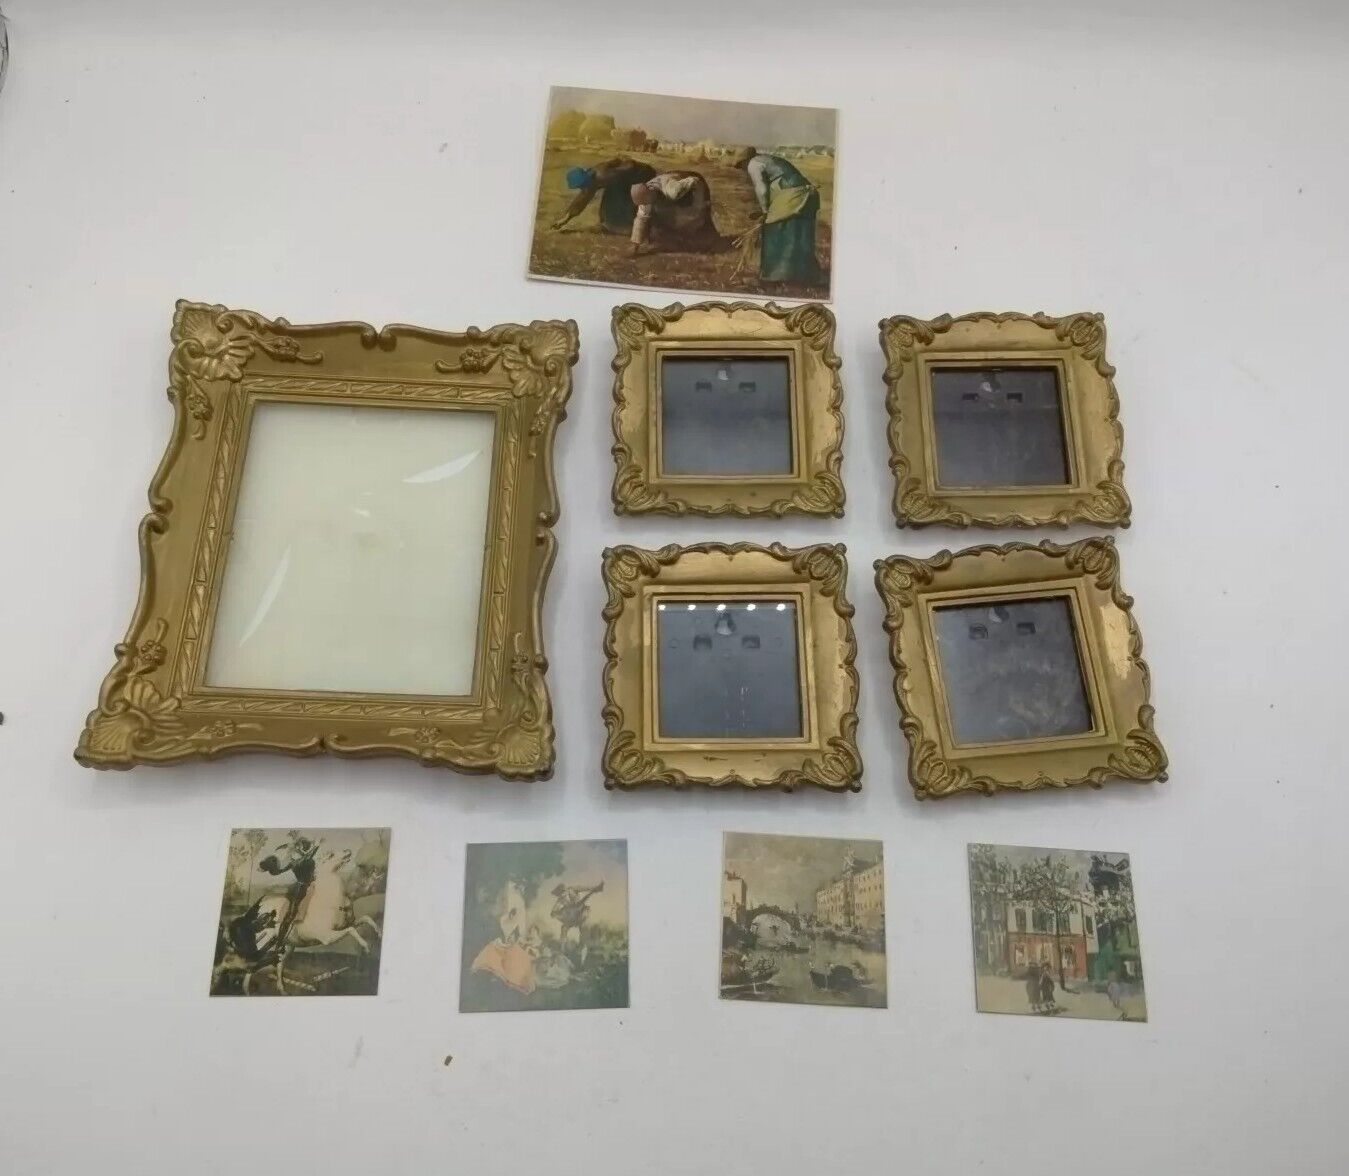 Vintage Hollywood Regency Ornate Gold Picture Frames Wall Art Small Lot of 5